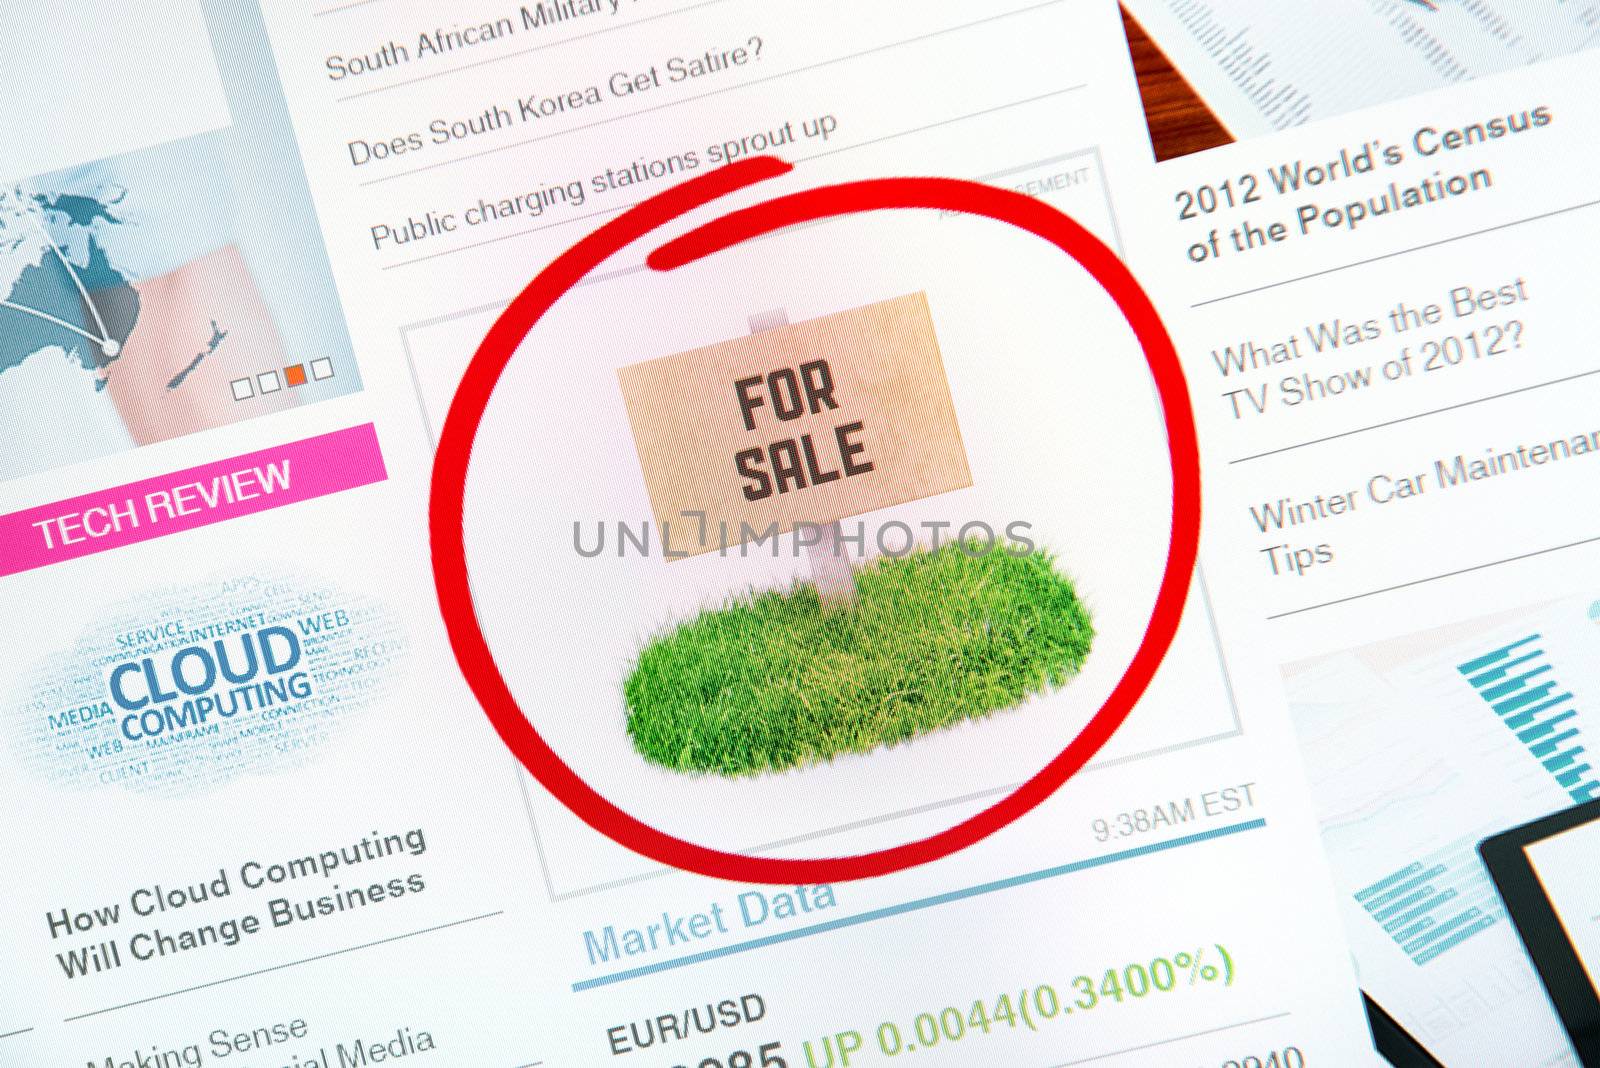 Sign on internet advertising with text "FOR SALE" and red circle selection around.